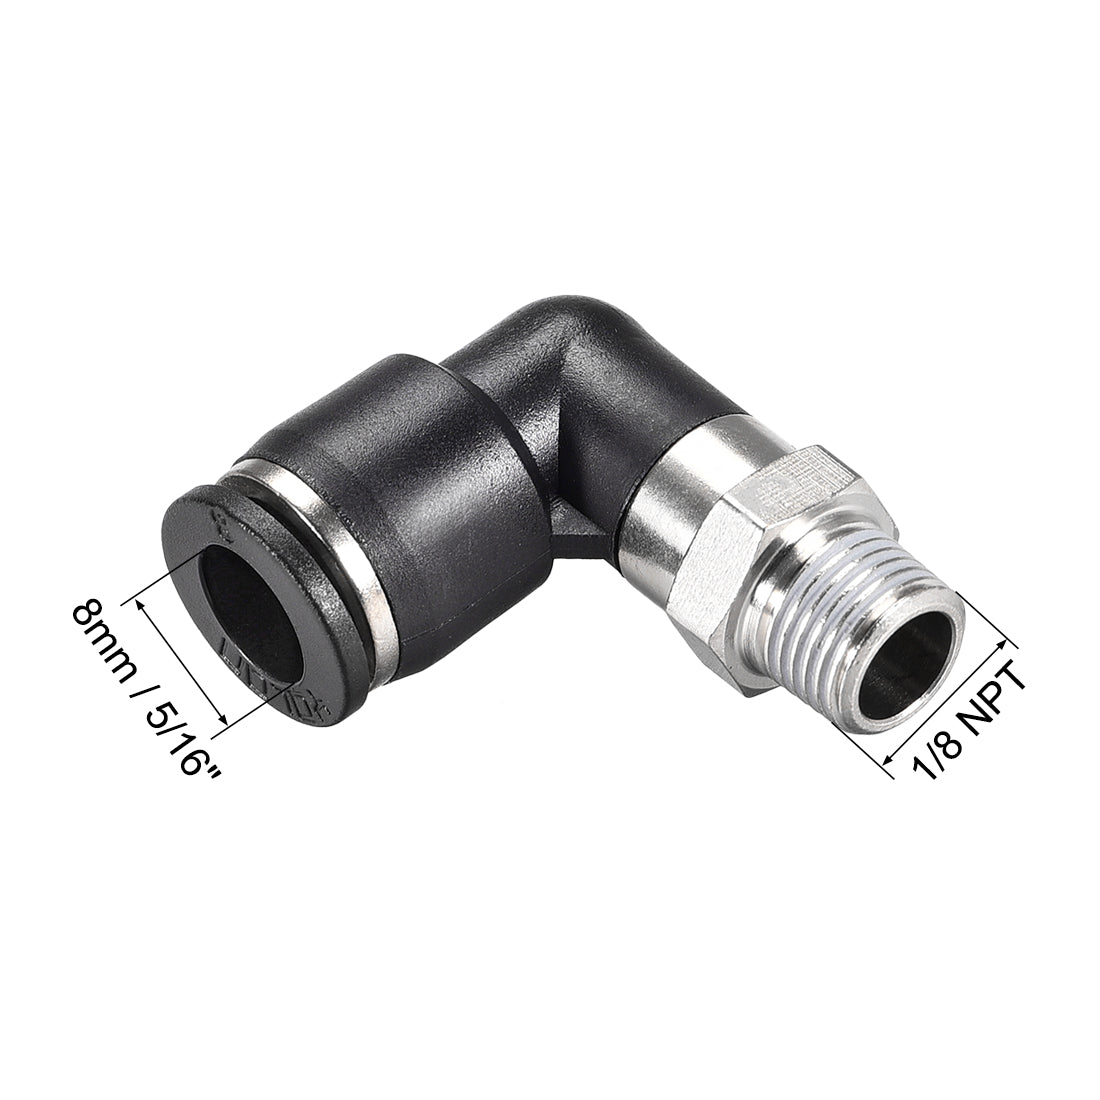 uxcell Uxcell Push to Connect Tube Fitting Male Elbow 8mm Tube OD x 1/8 NPT Thread Pneumatic Air Push Fit Lock Fitting 4pcs